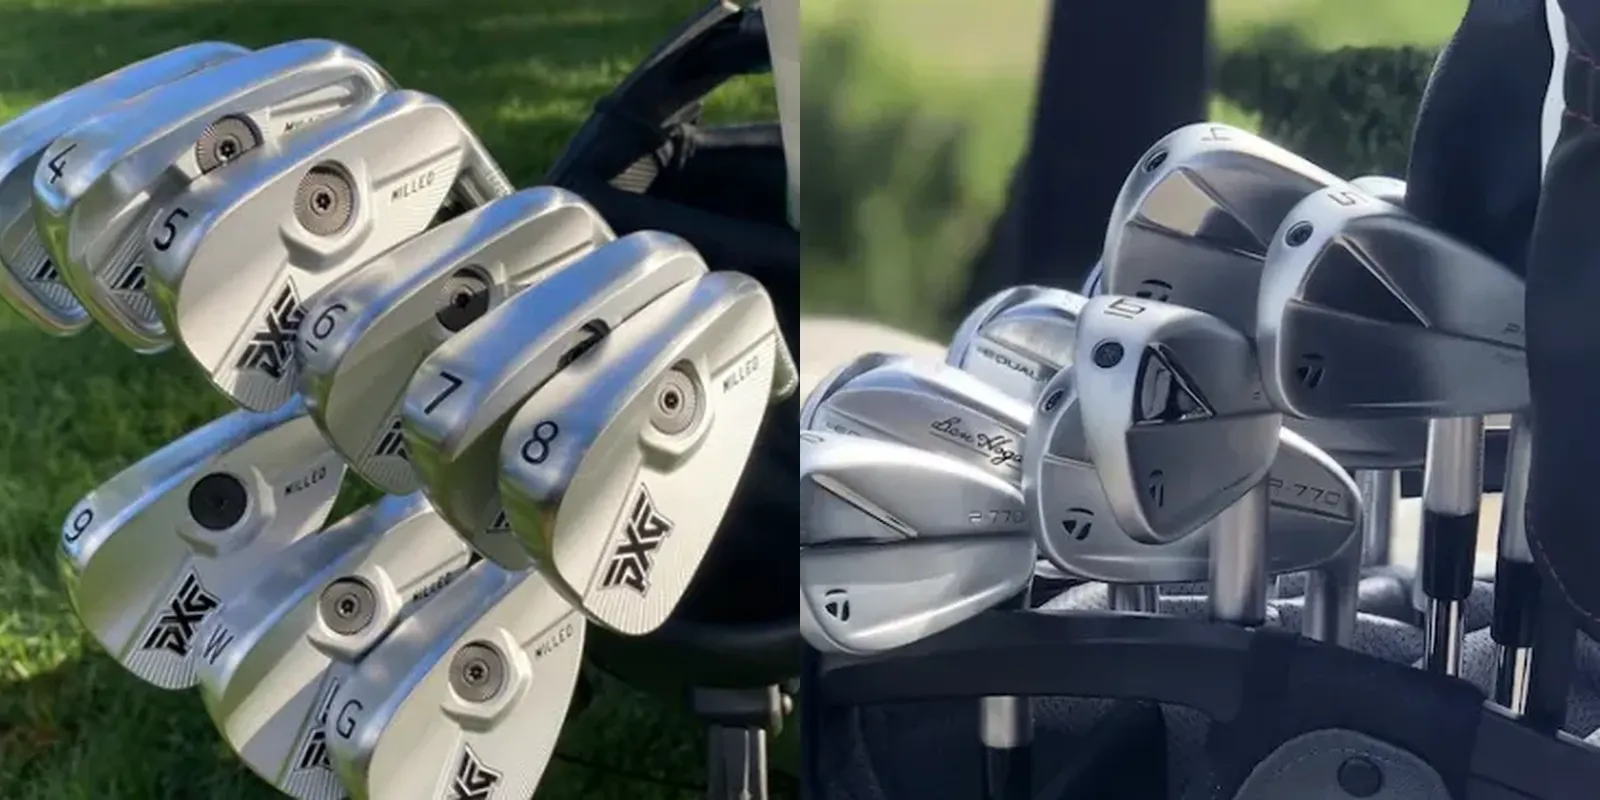 Pxg 0317 T Irons Vs Taylormade P770 Irons: Performance